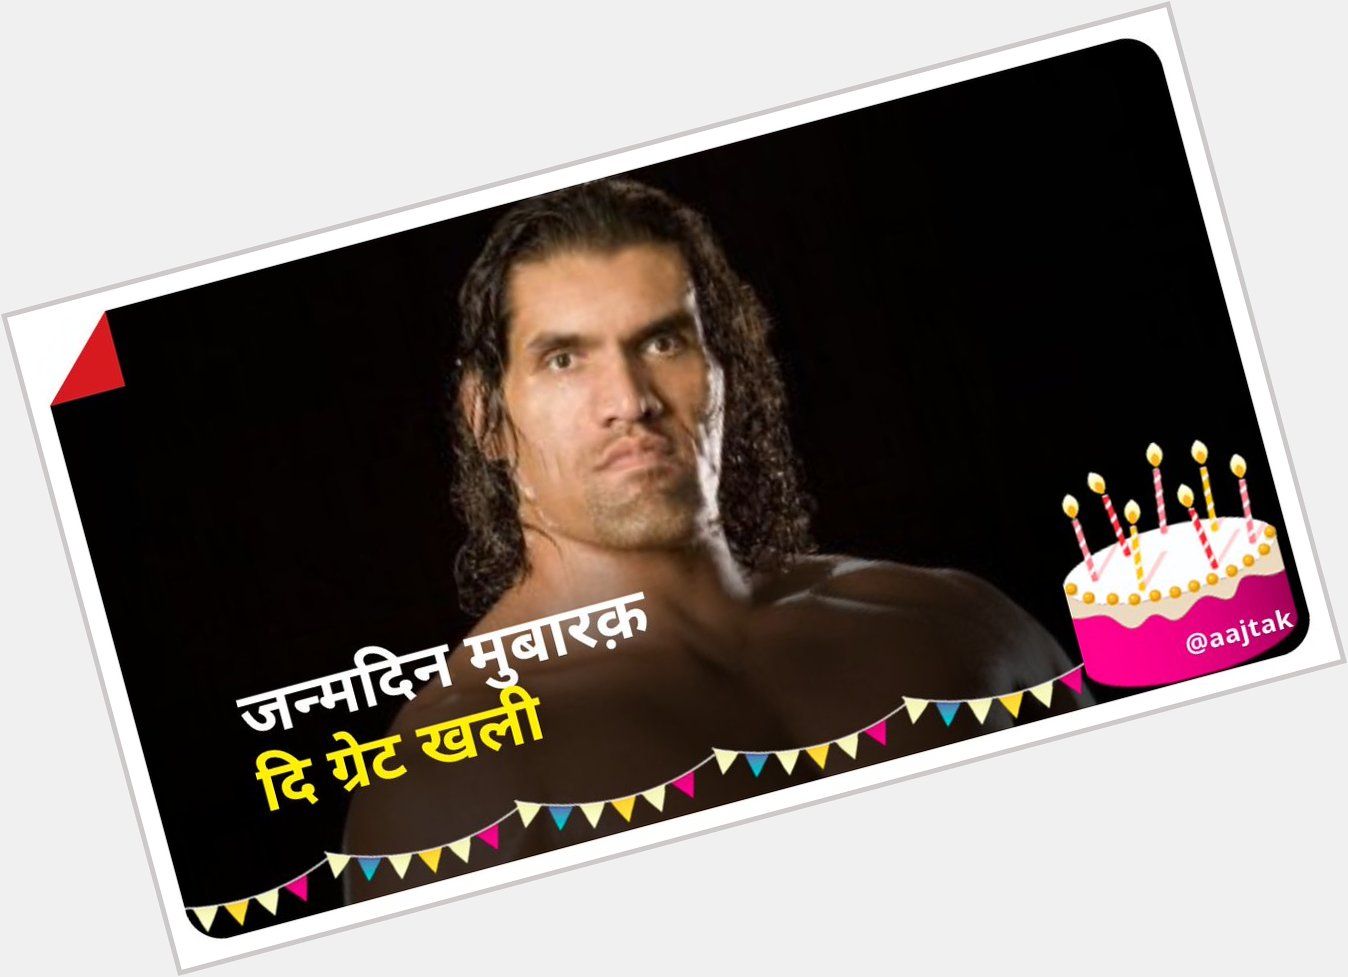 Wish you a very great happy birthday to you  the great khali 